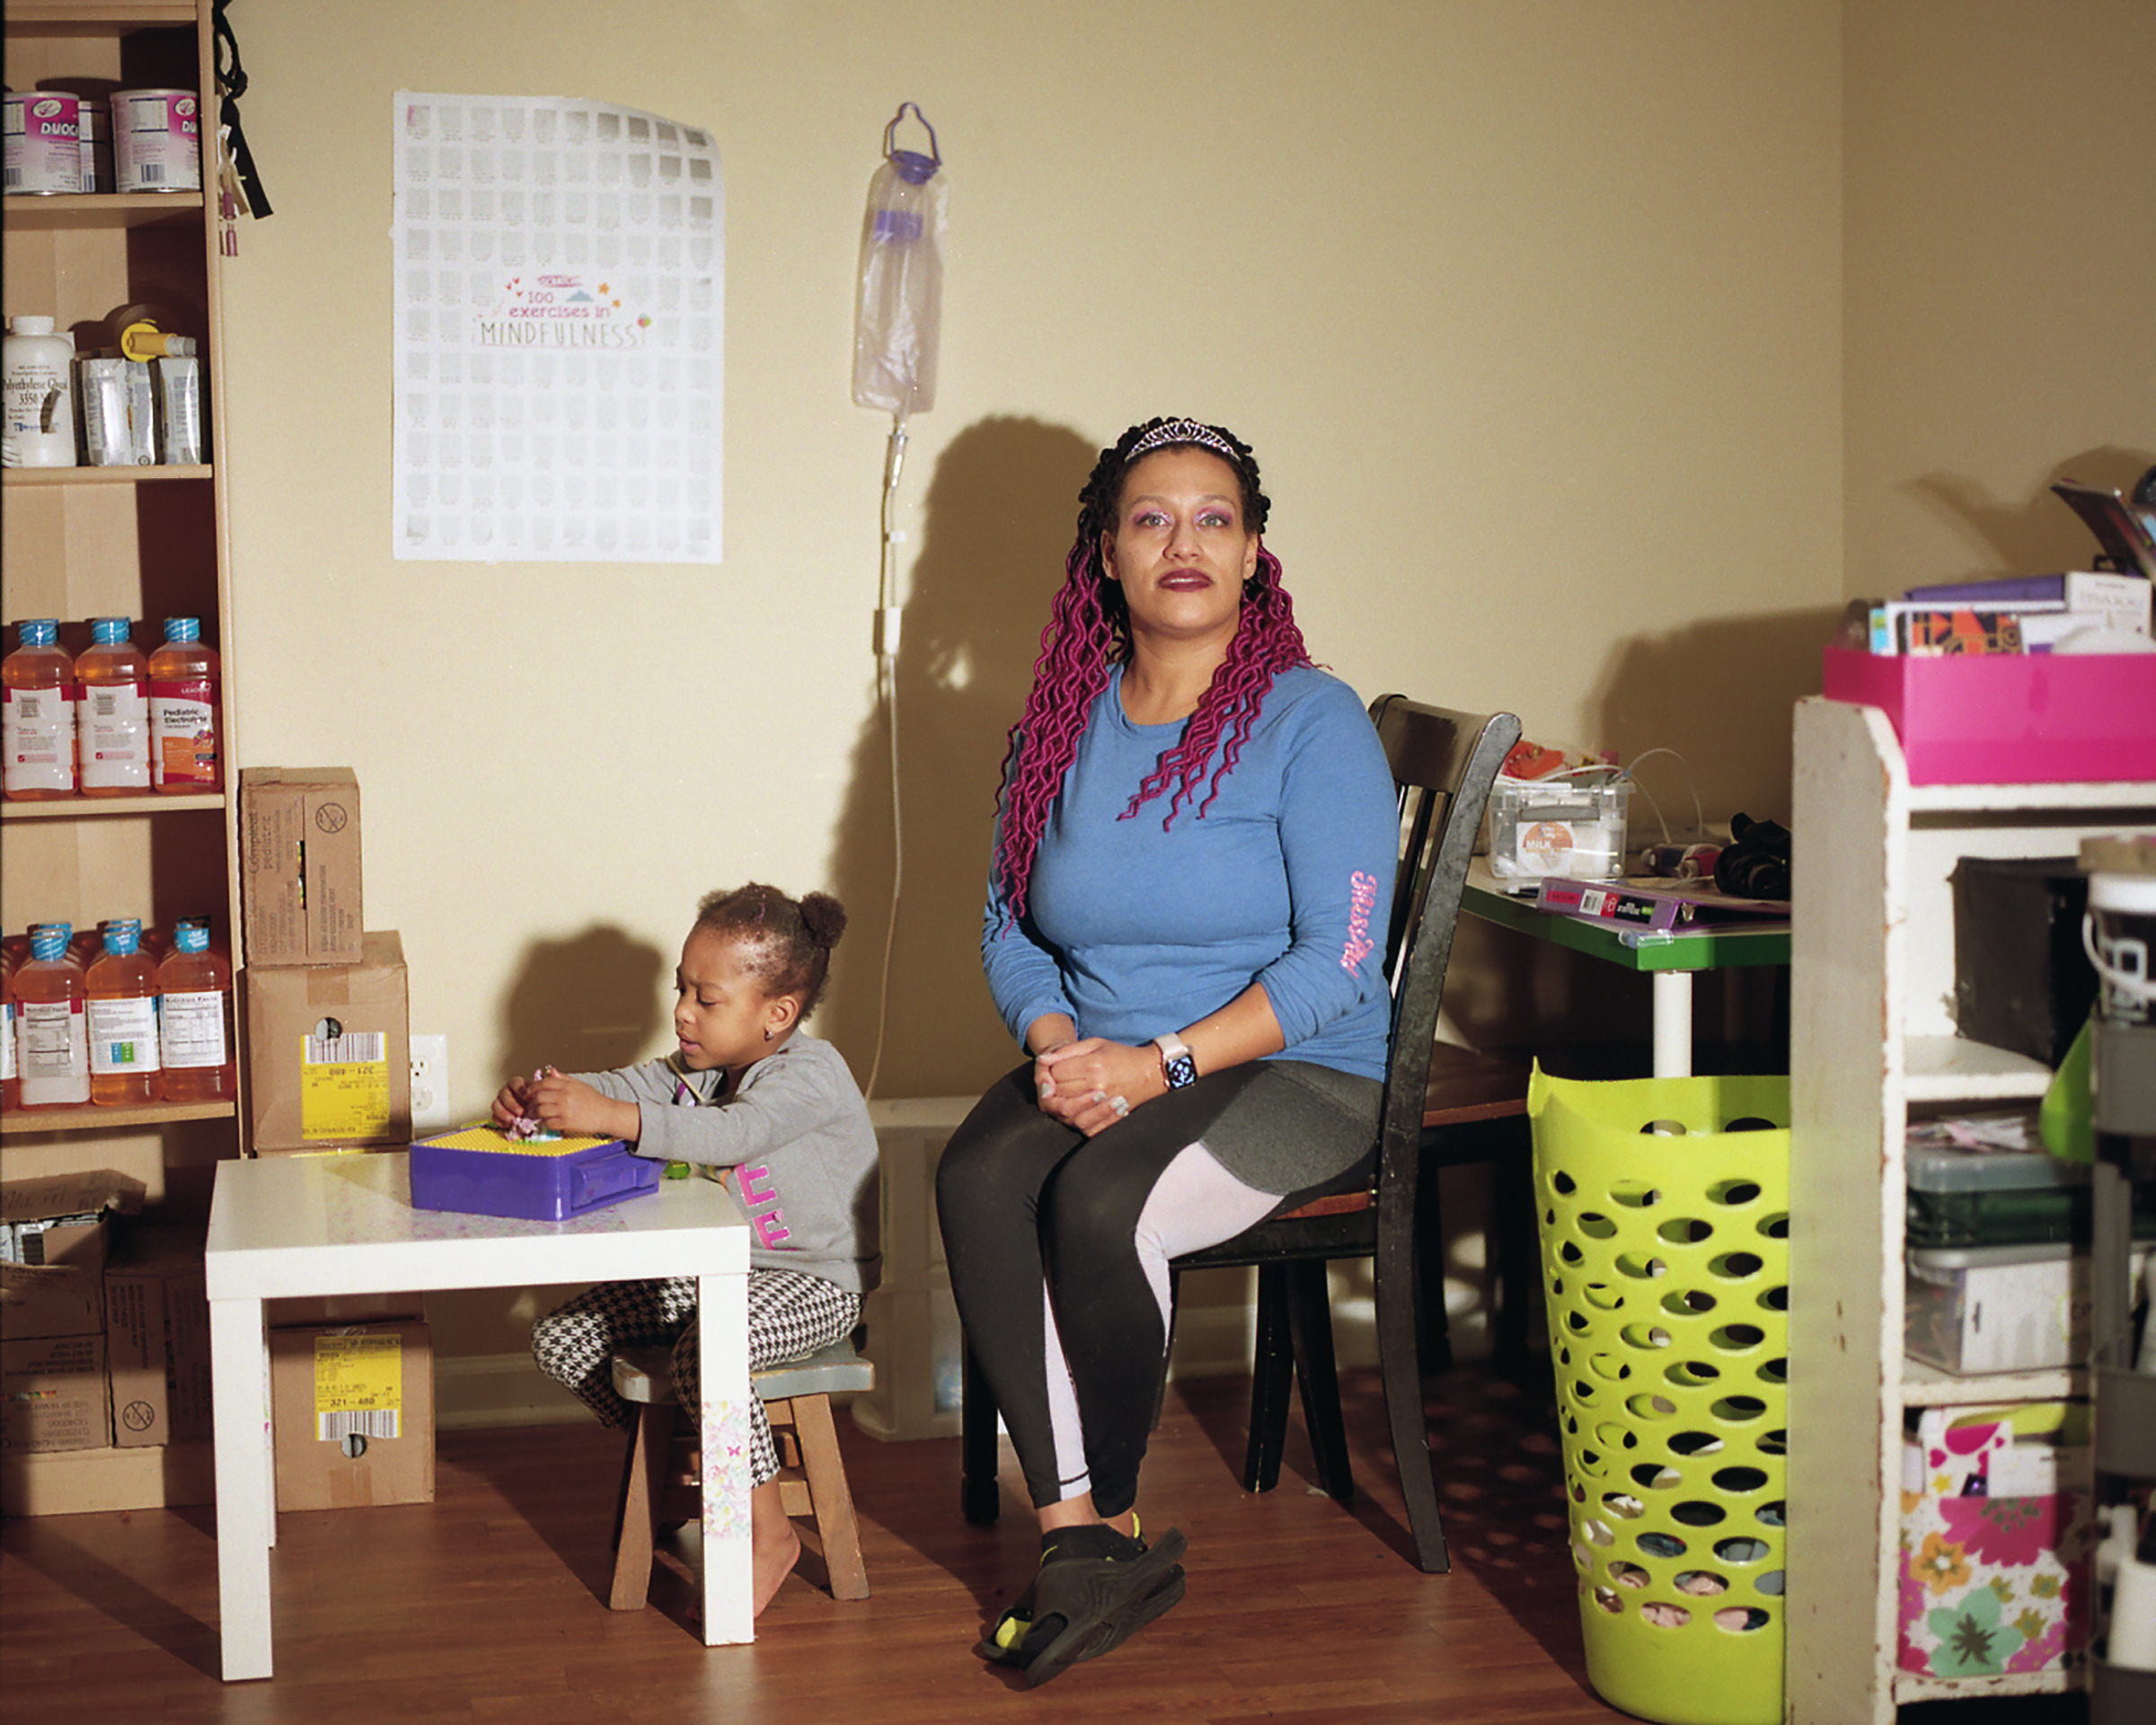 A third-floor walk-up isn’t ideal for Shneila Lee’s children with special needs, but she worries she won’t find another landlord willing to accept her housing subsidy. (Kennedi Carter for TIME)